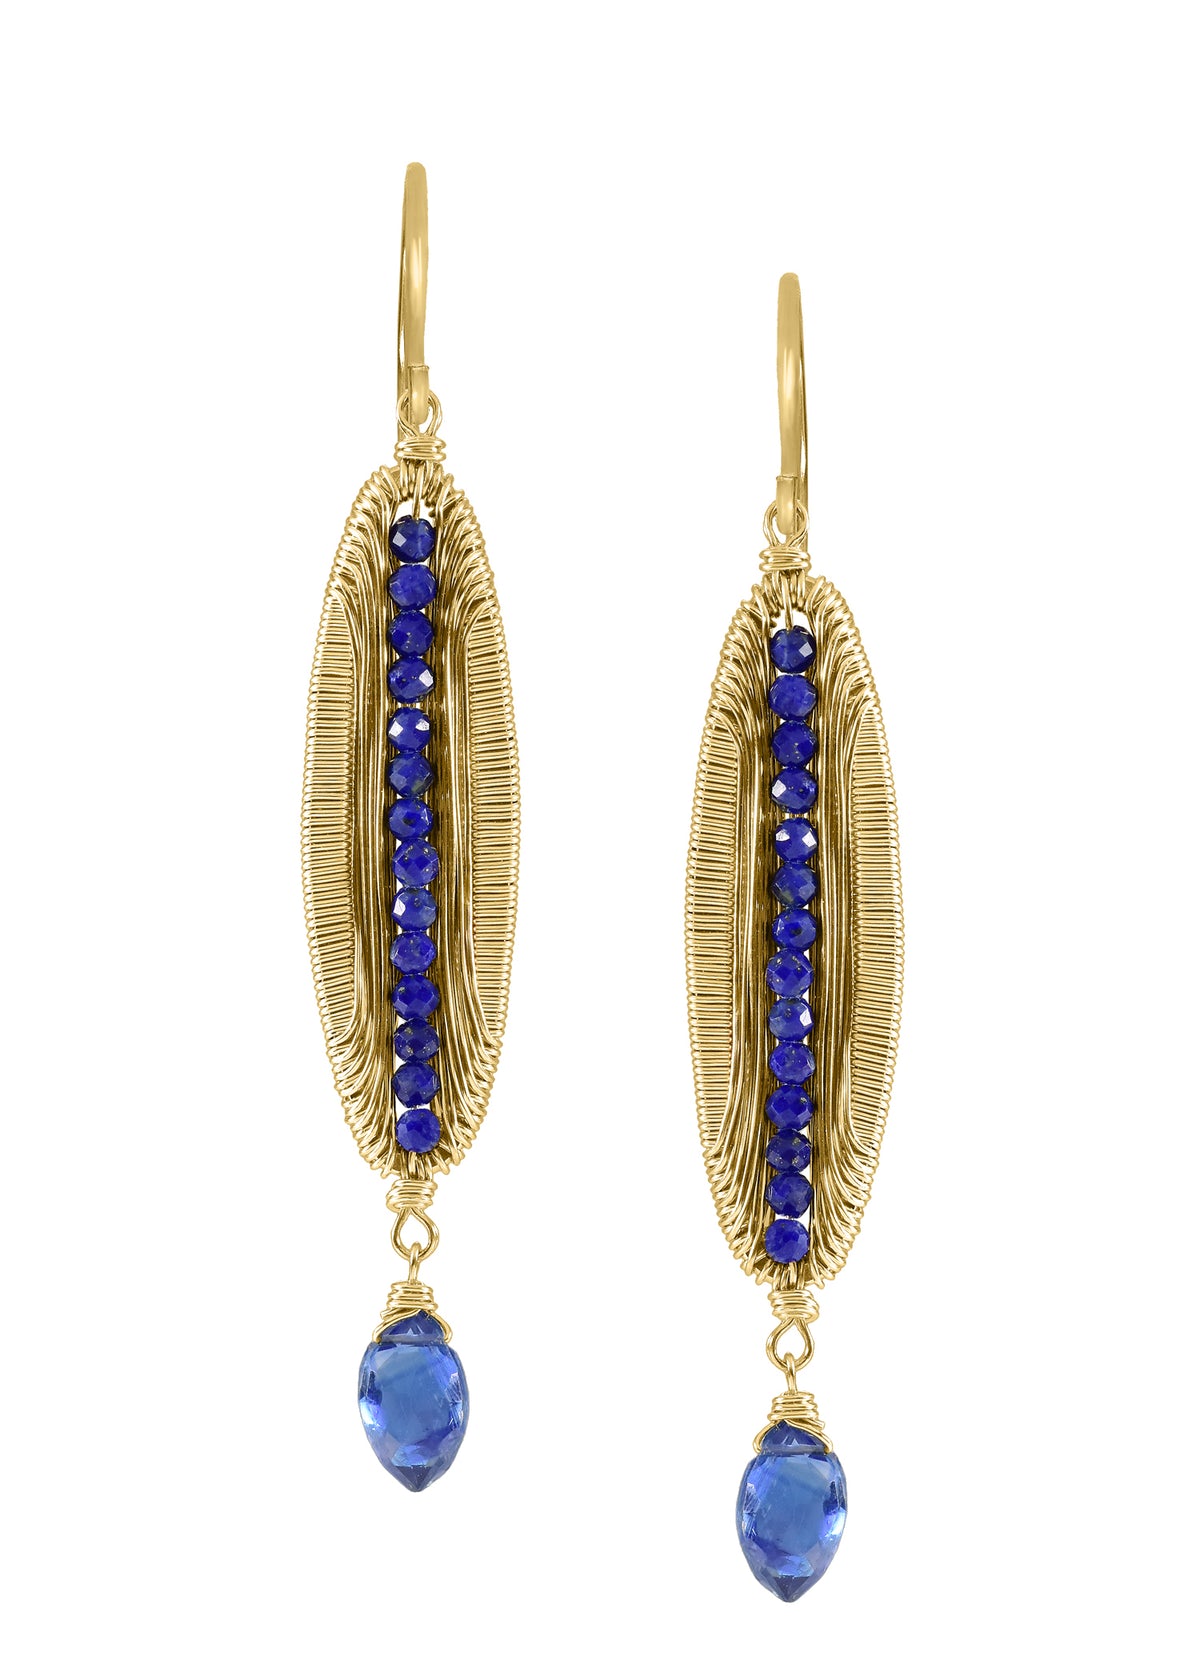 Blue lapis Kyanite 14k gold fill Earrings measure 2&quot; in length (including the ear wires) and 5/16&quot; in width at the widest point Handmade in our Los Angeles studio